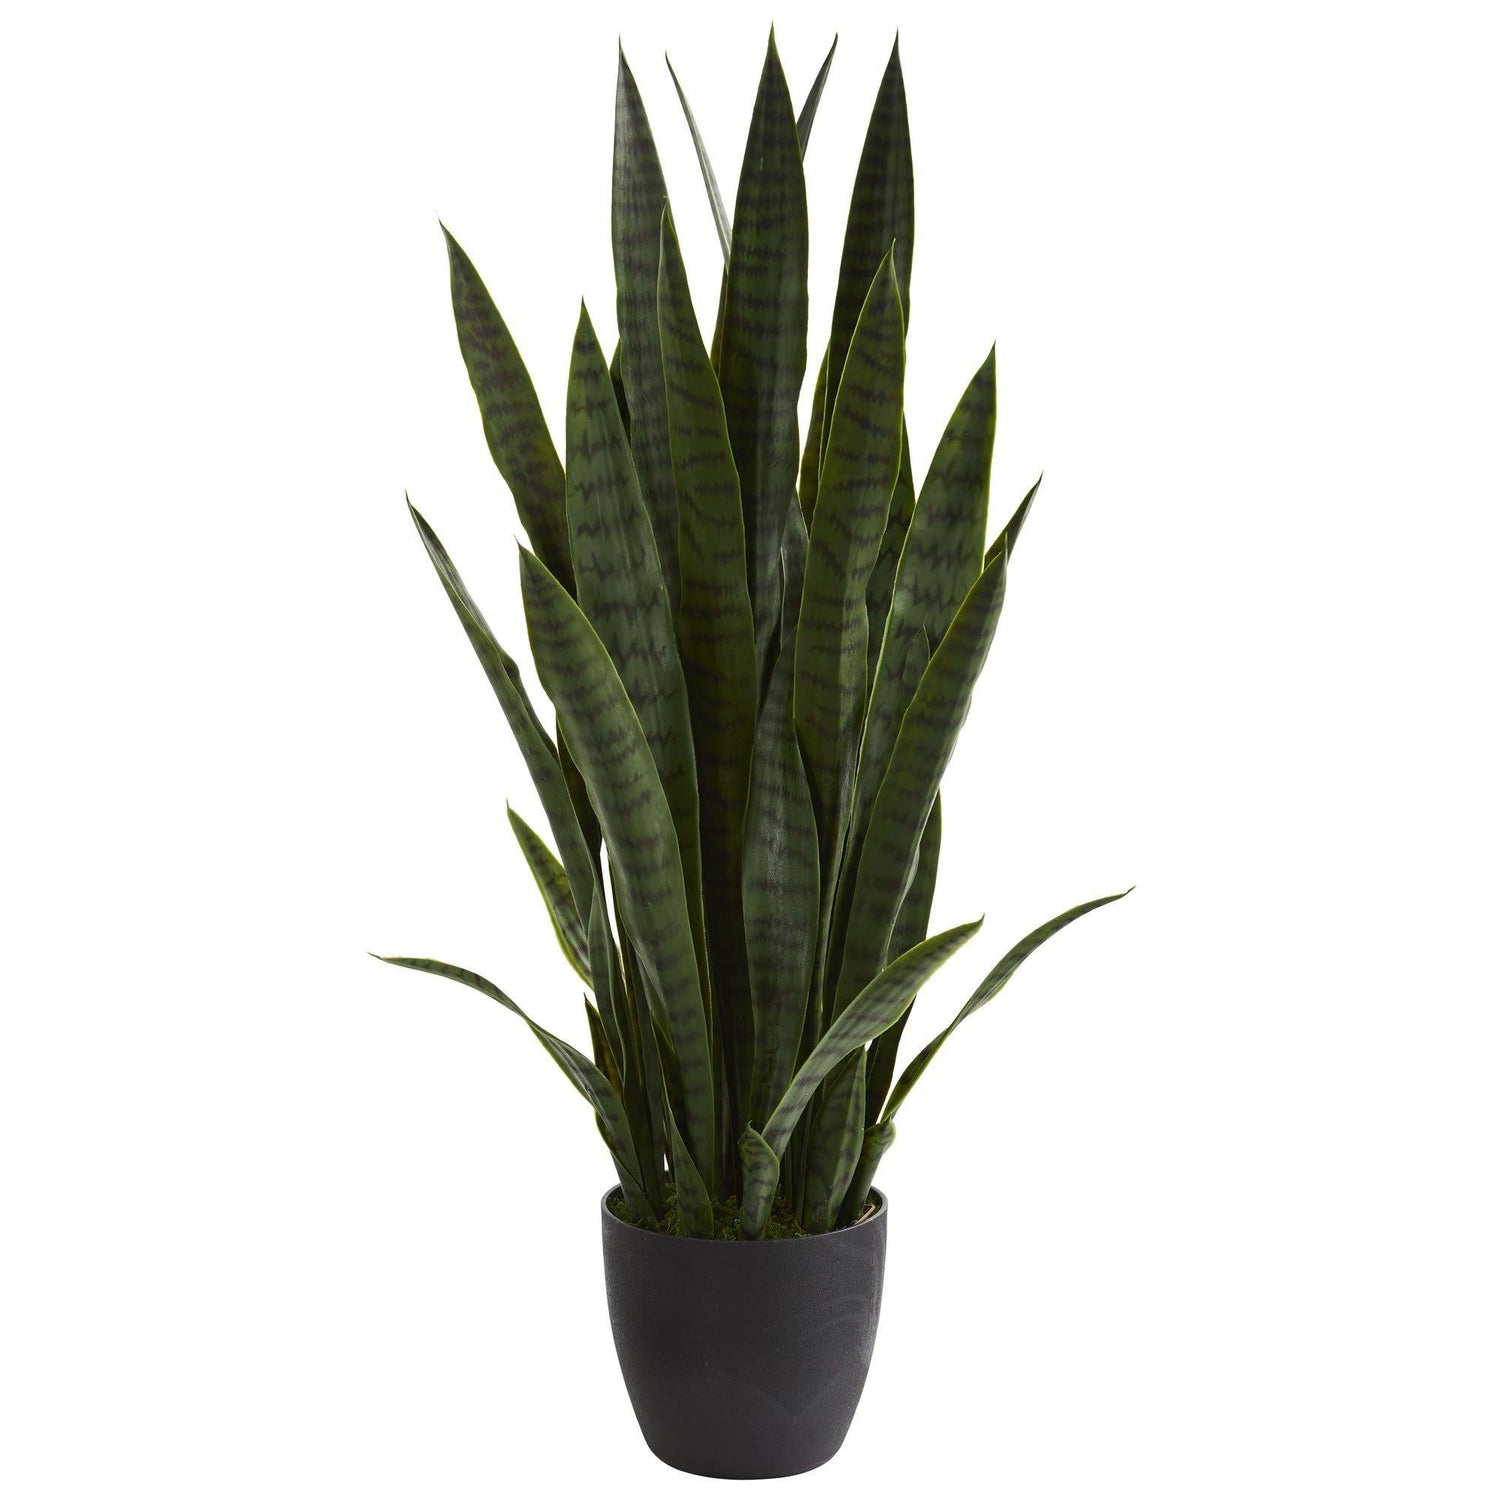 DUZYXI Artificial Snake Plants 16 with White Ceramic Pot Sansevieria Plant  Fake Snake Plant Greenery Faux Snake Plant in Pot for Home Office Living  Room Housewarming Gifts Indoor Outdoor Decor-Green : 